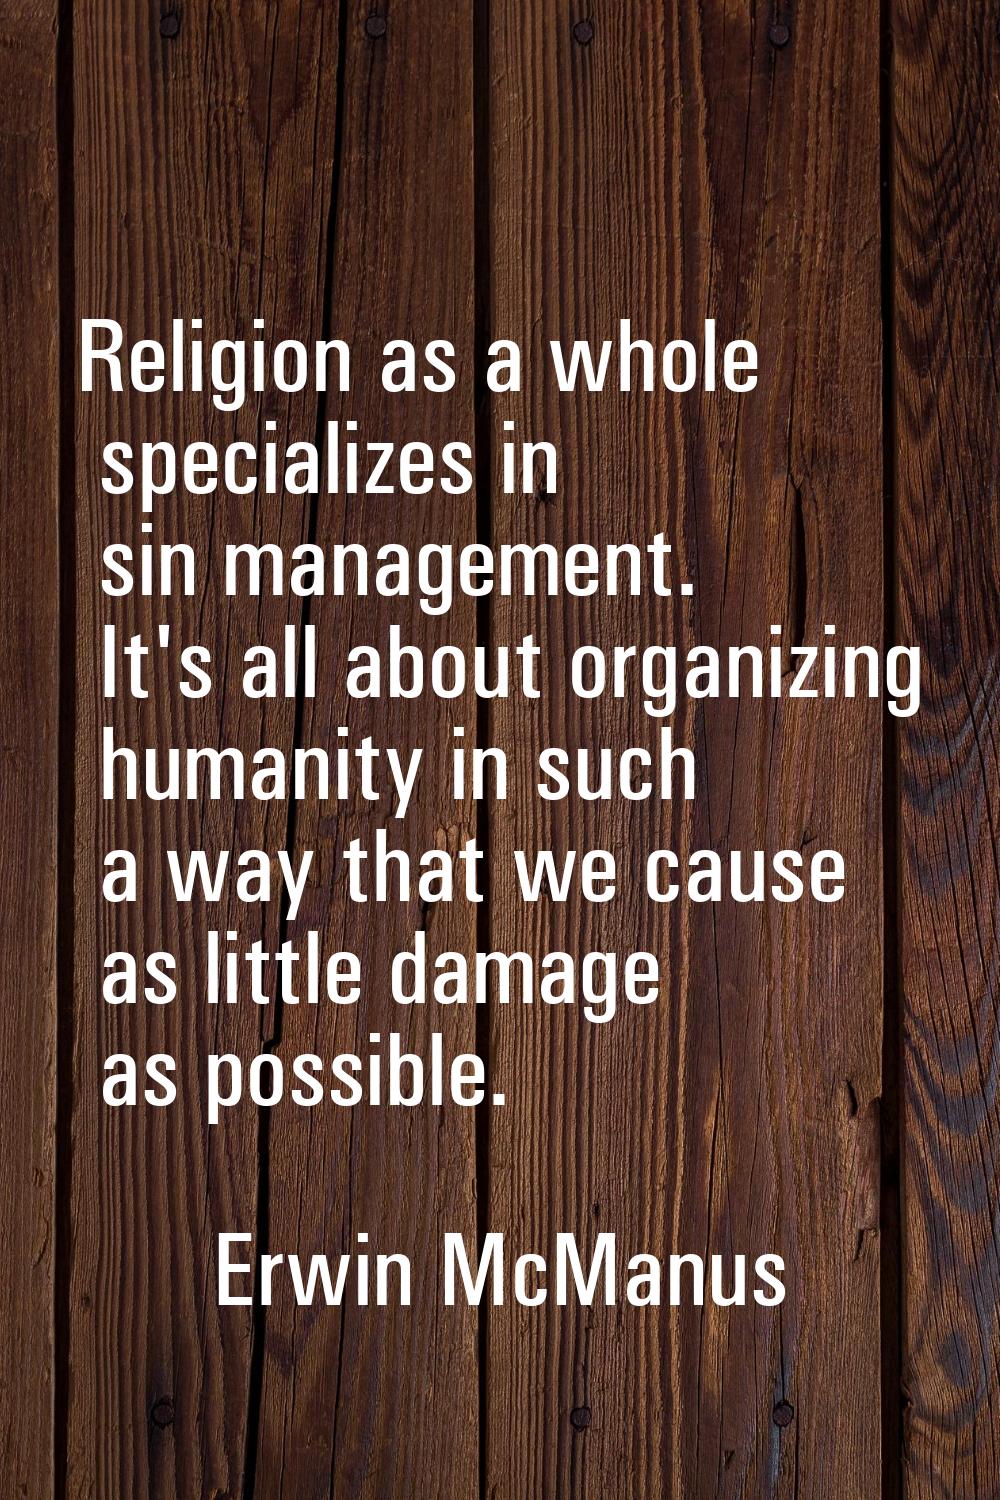 Religion as a whole specializes in sin management. It's all about organizing humanity in such a way